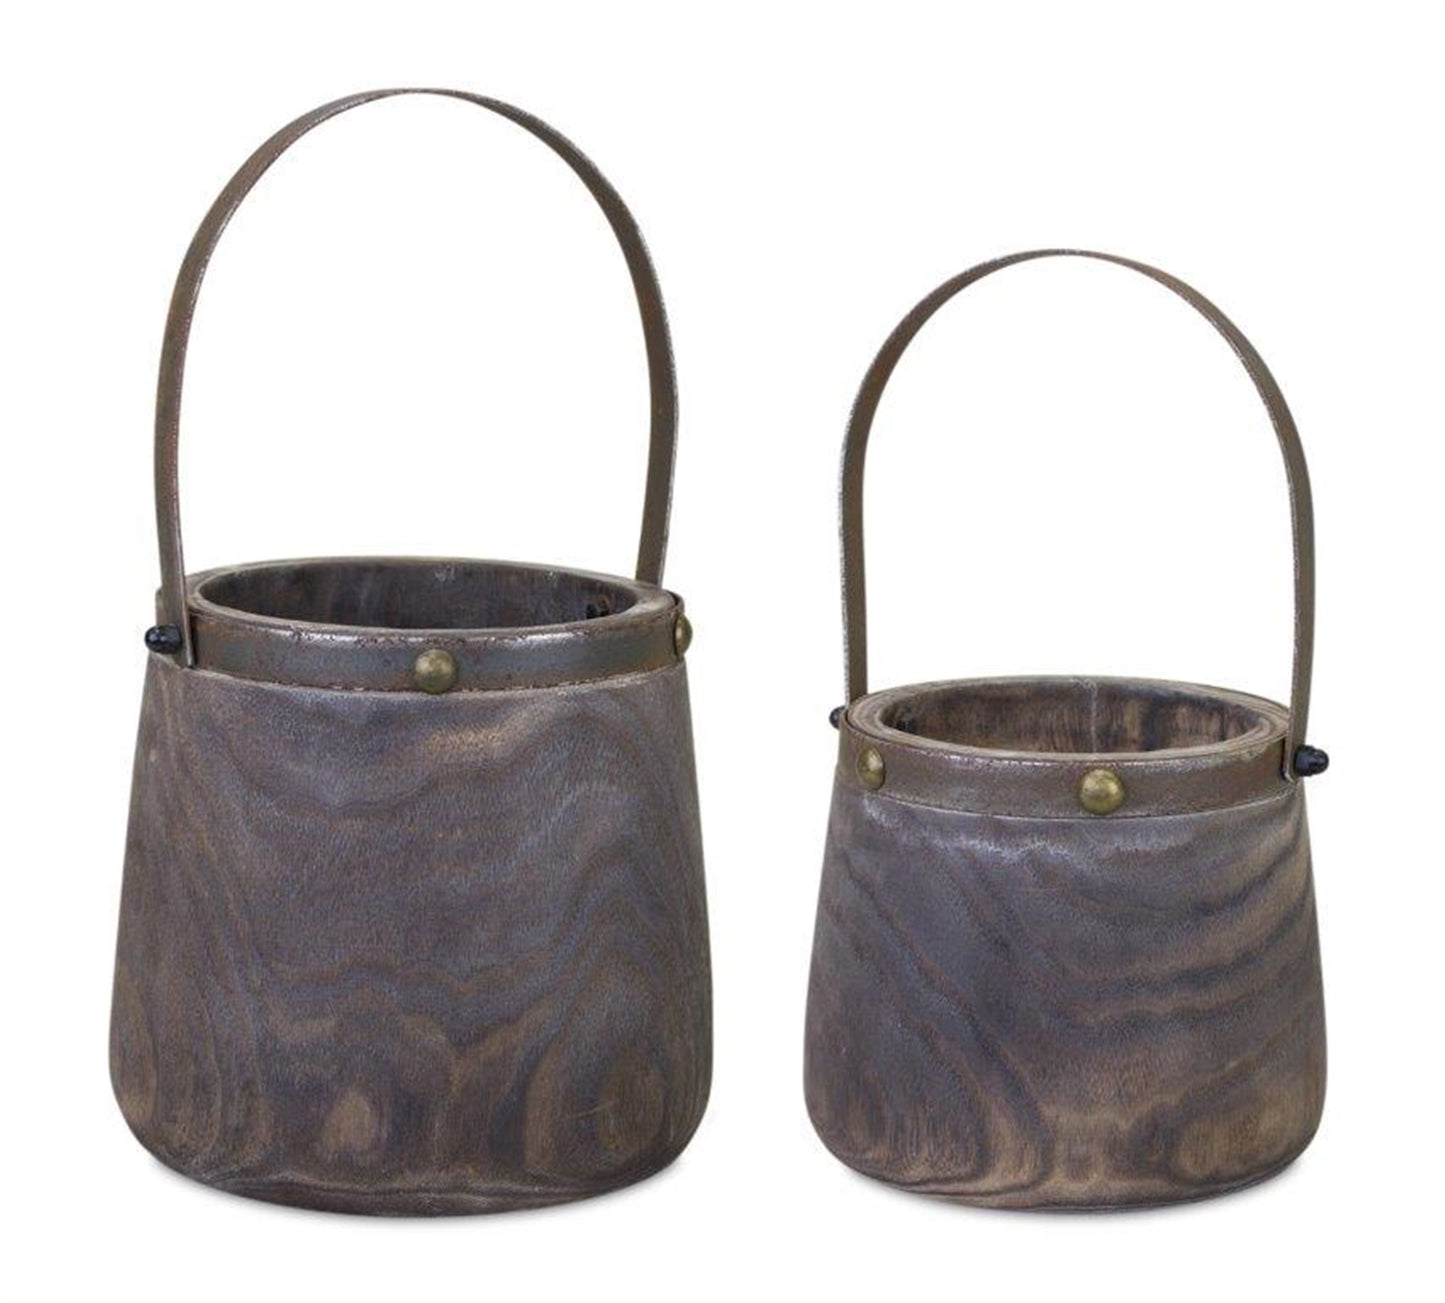 Natural Wooden Pail Planter with Metal Handle Accent (Set of 2)